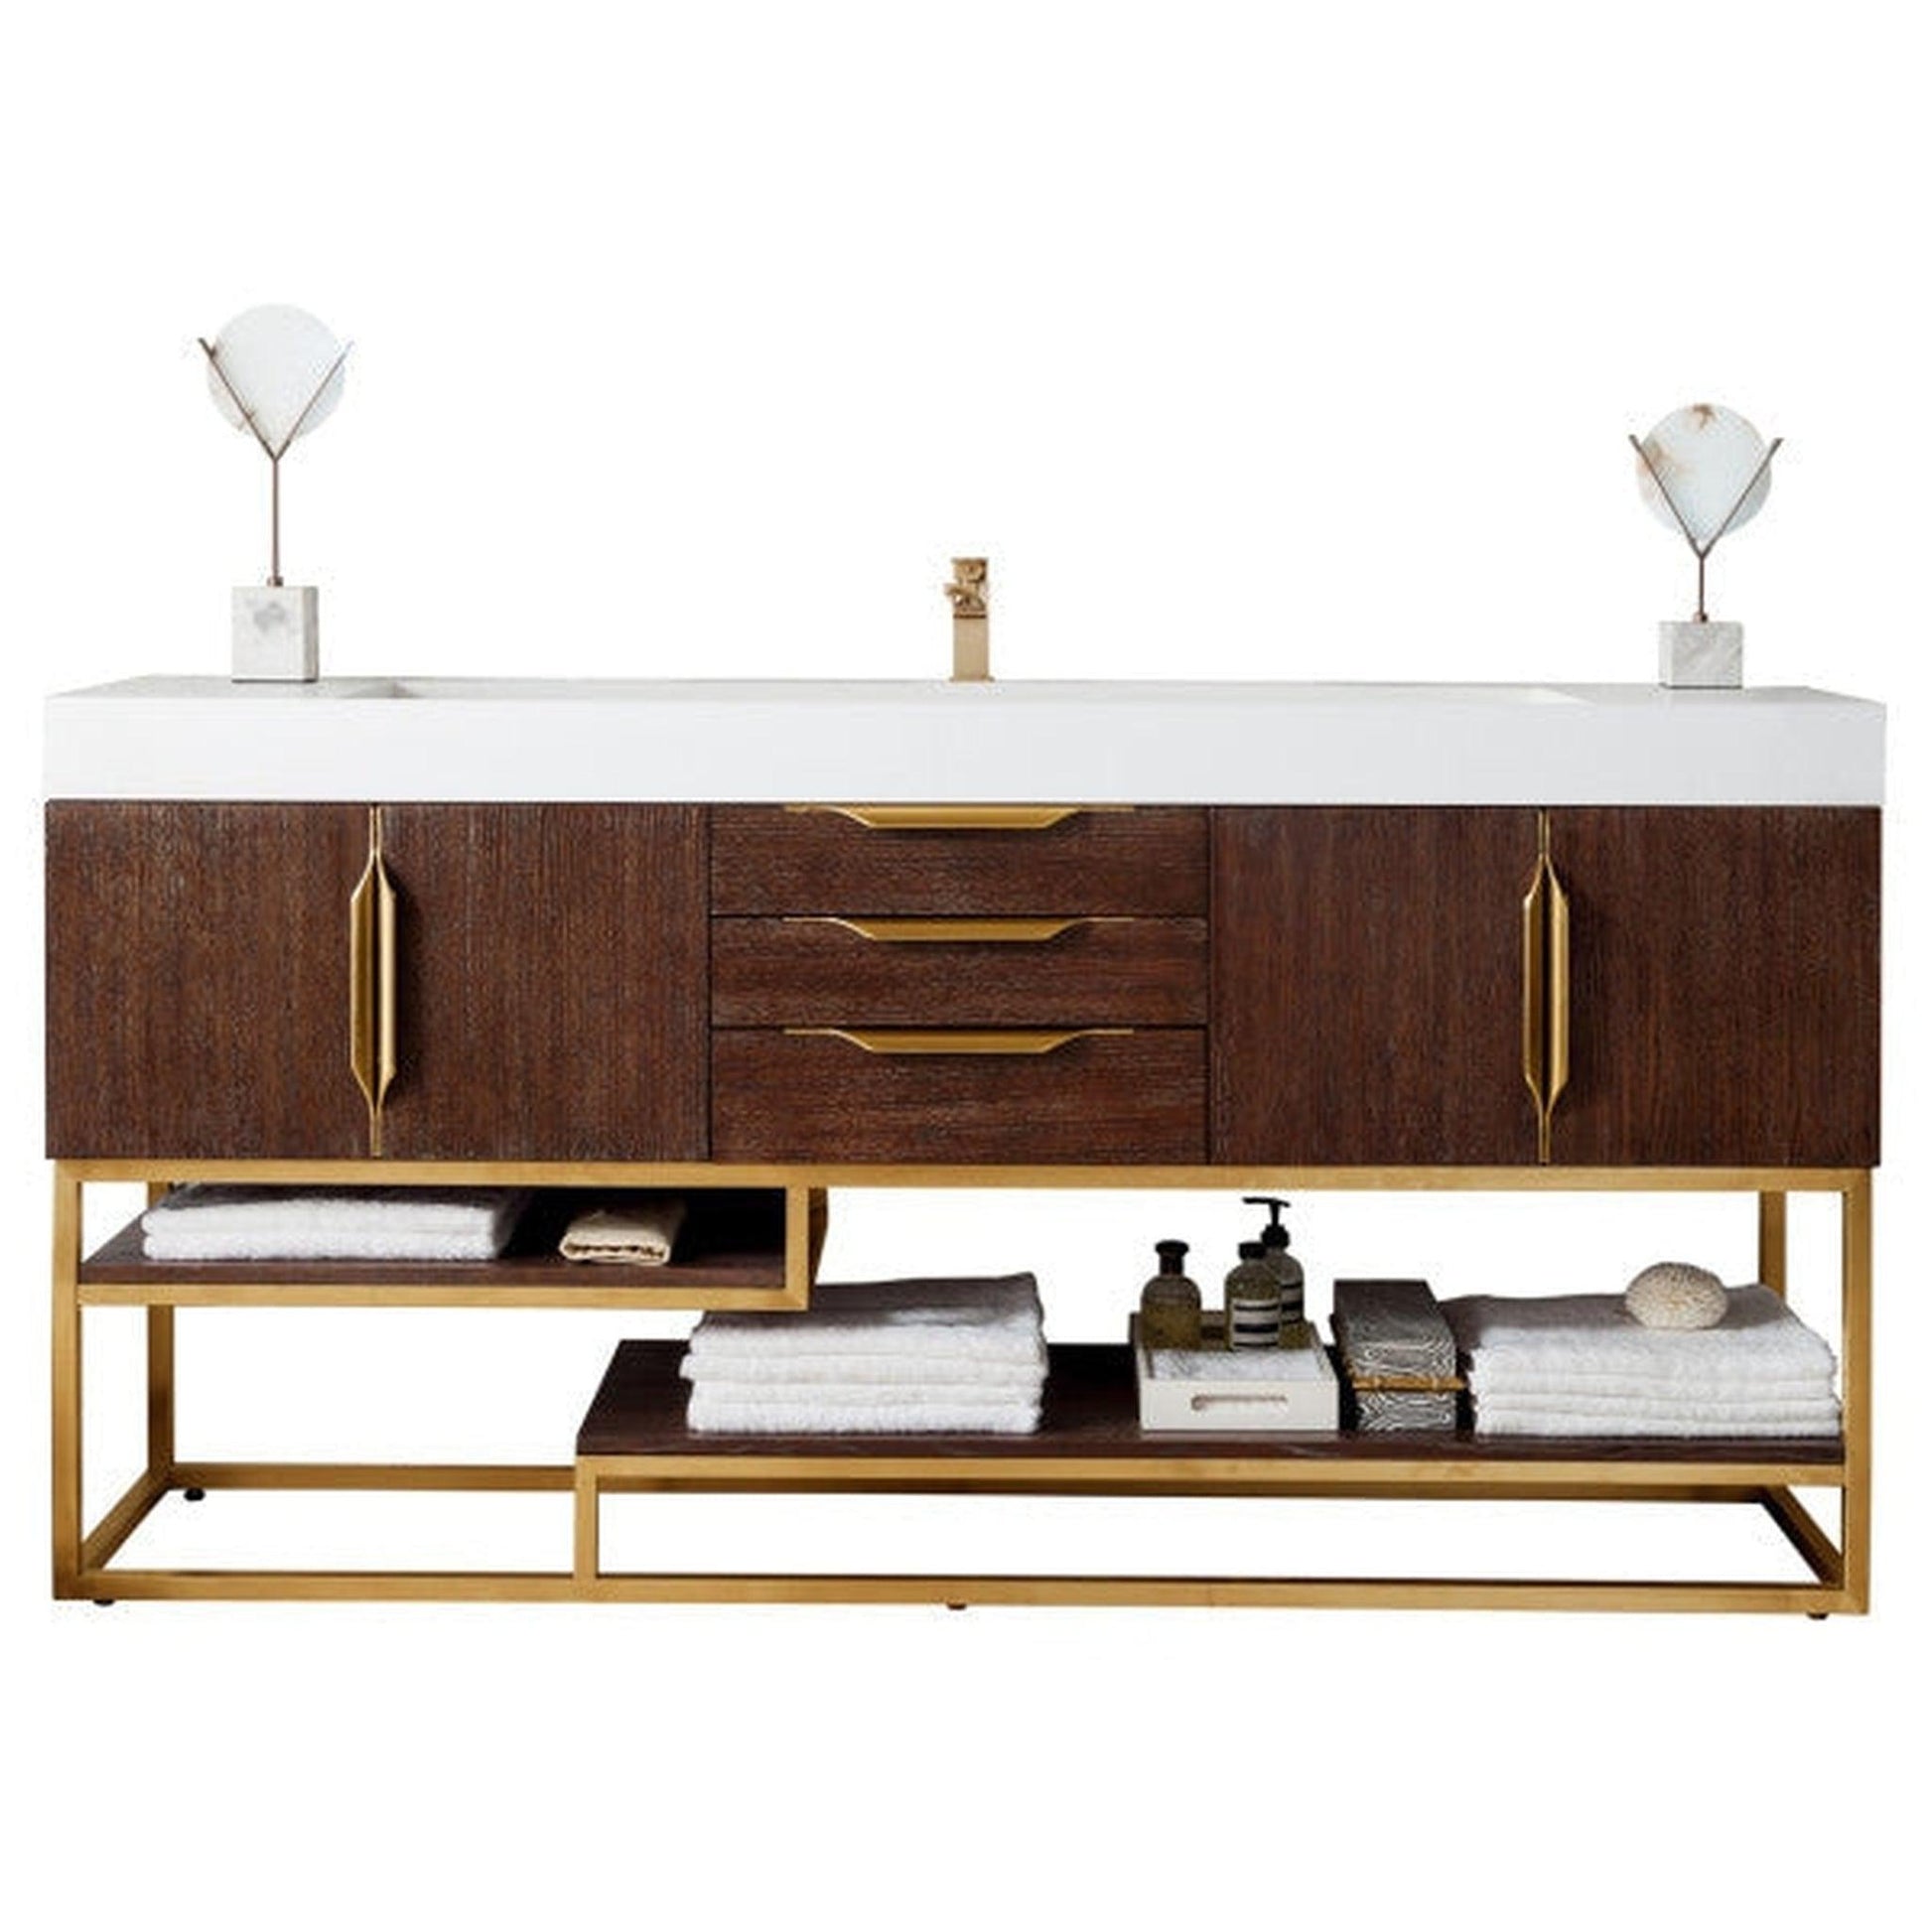 James Martin Columbia 73" Single Coffee Oak Bathroom Vanity With Radiant Gold Hardware and 6" Glossy White Composite Countertop